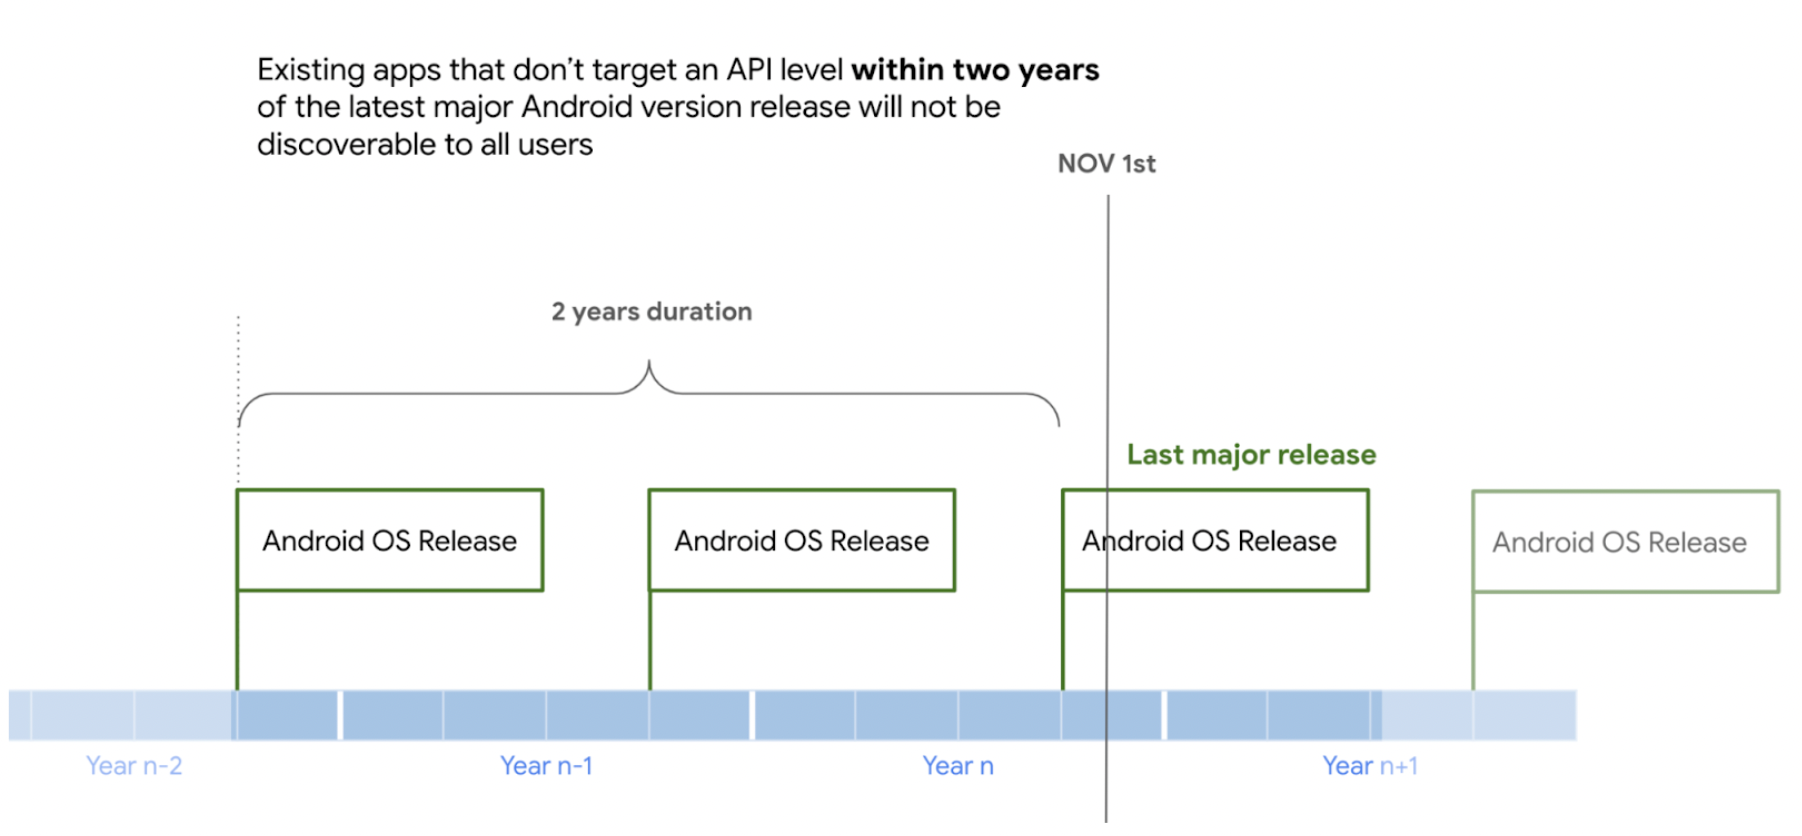 Targeting API level requirements for existing applications, effective November 1st.  (Photo: android developer blog)